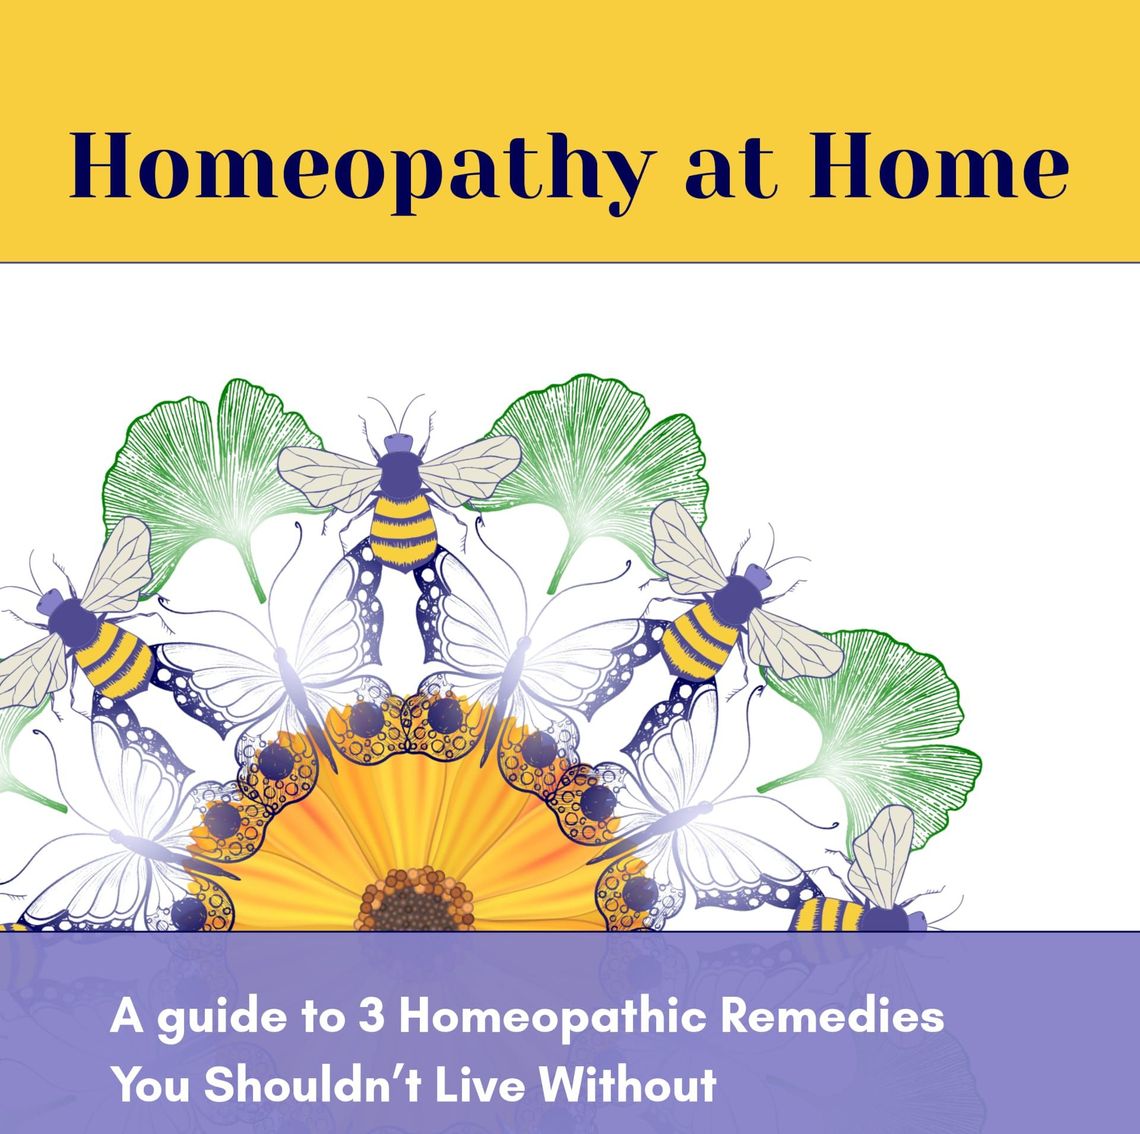 Homeopathy at home: 3 remedies guide